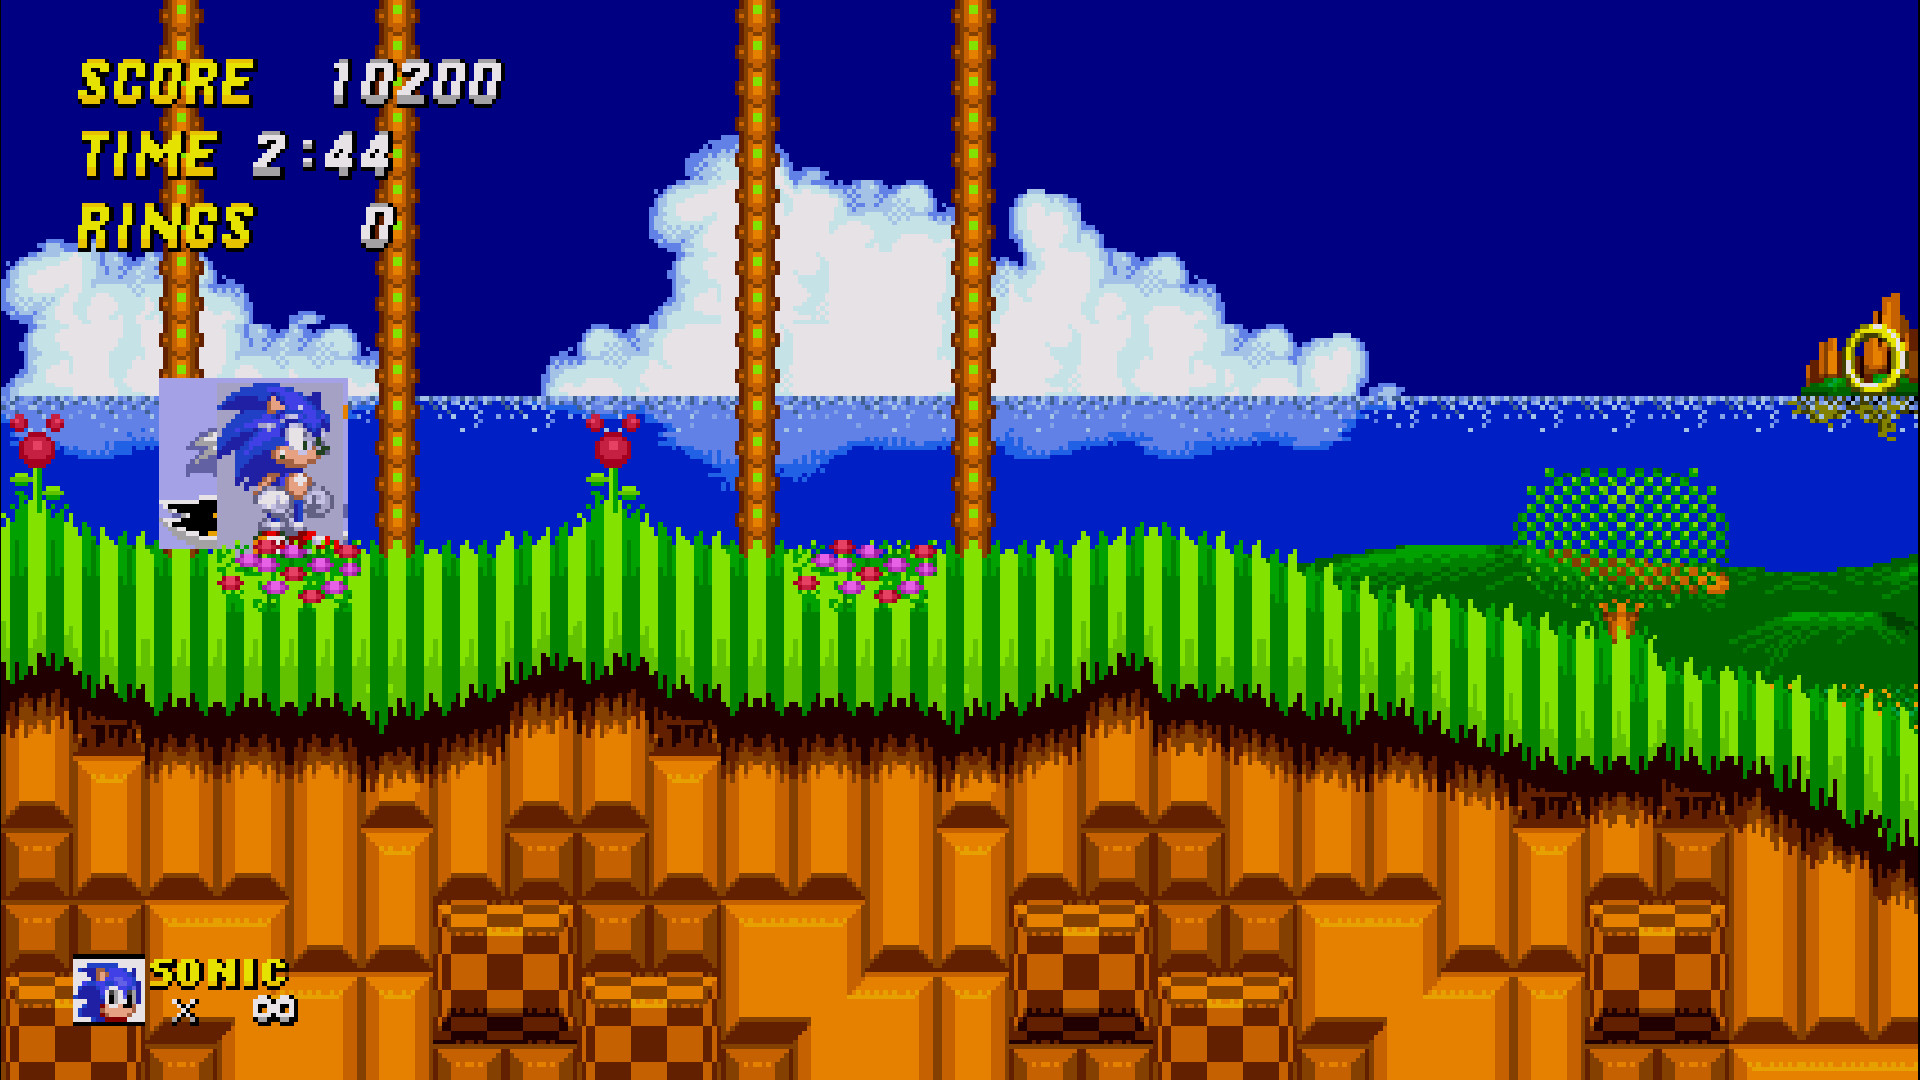 Play Genesis Modern Sonic in Sonic 2 Online in your browser